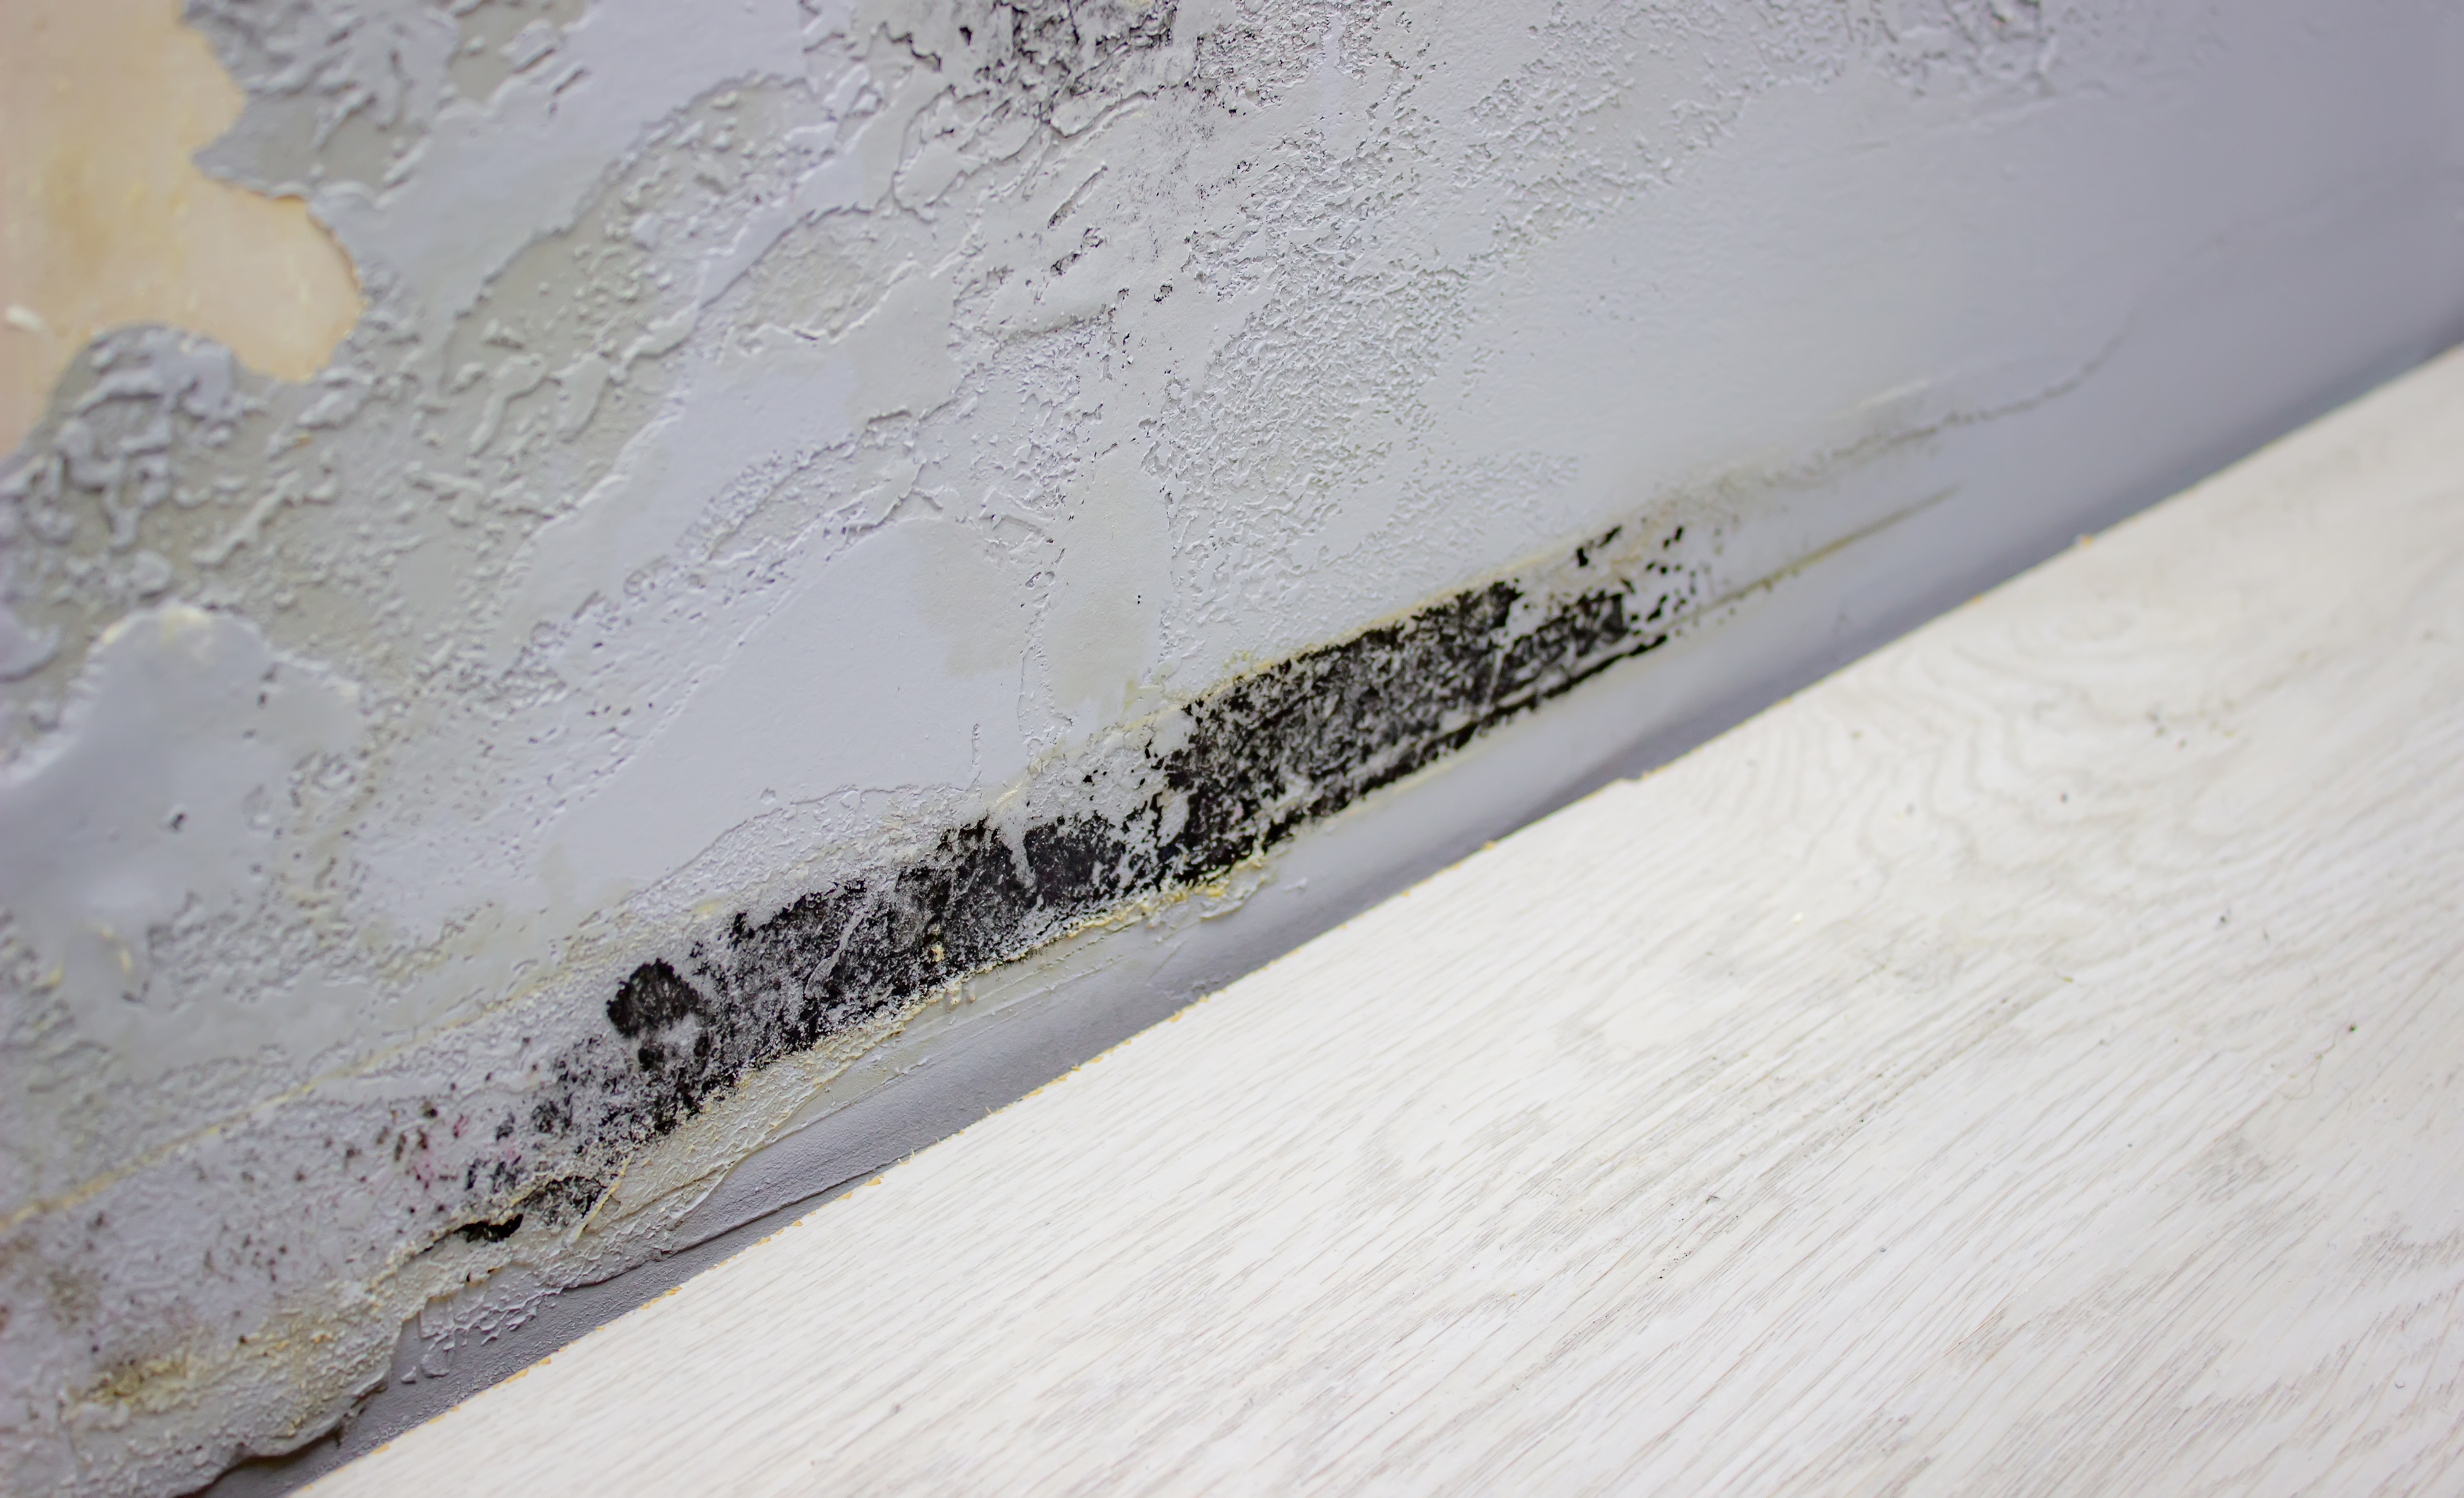 When to Call for Mold Removal